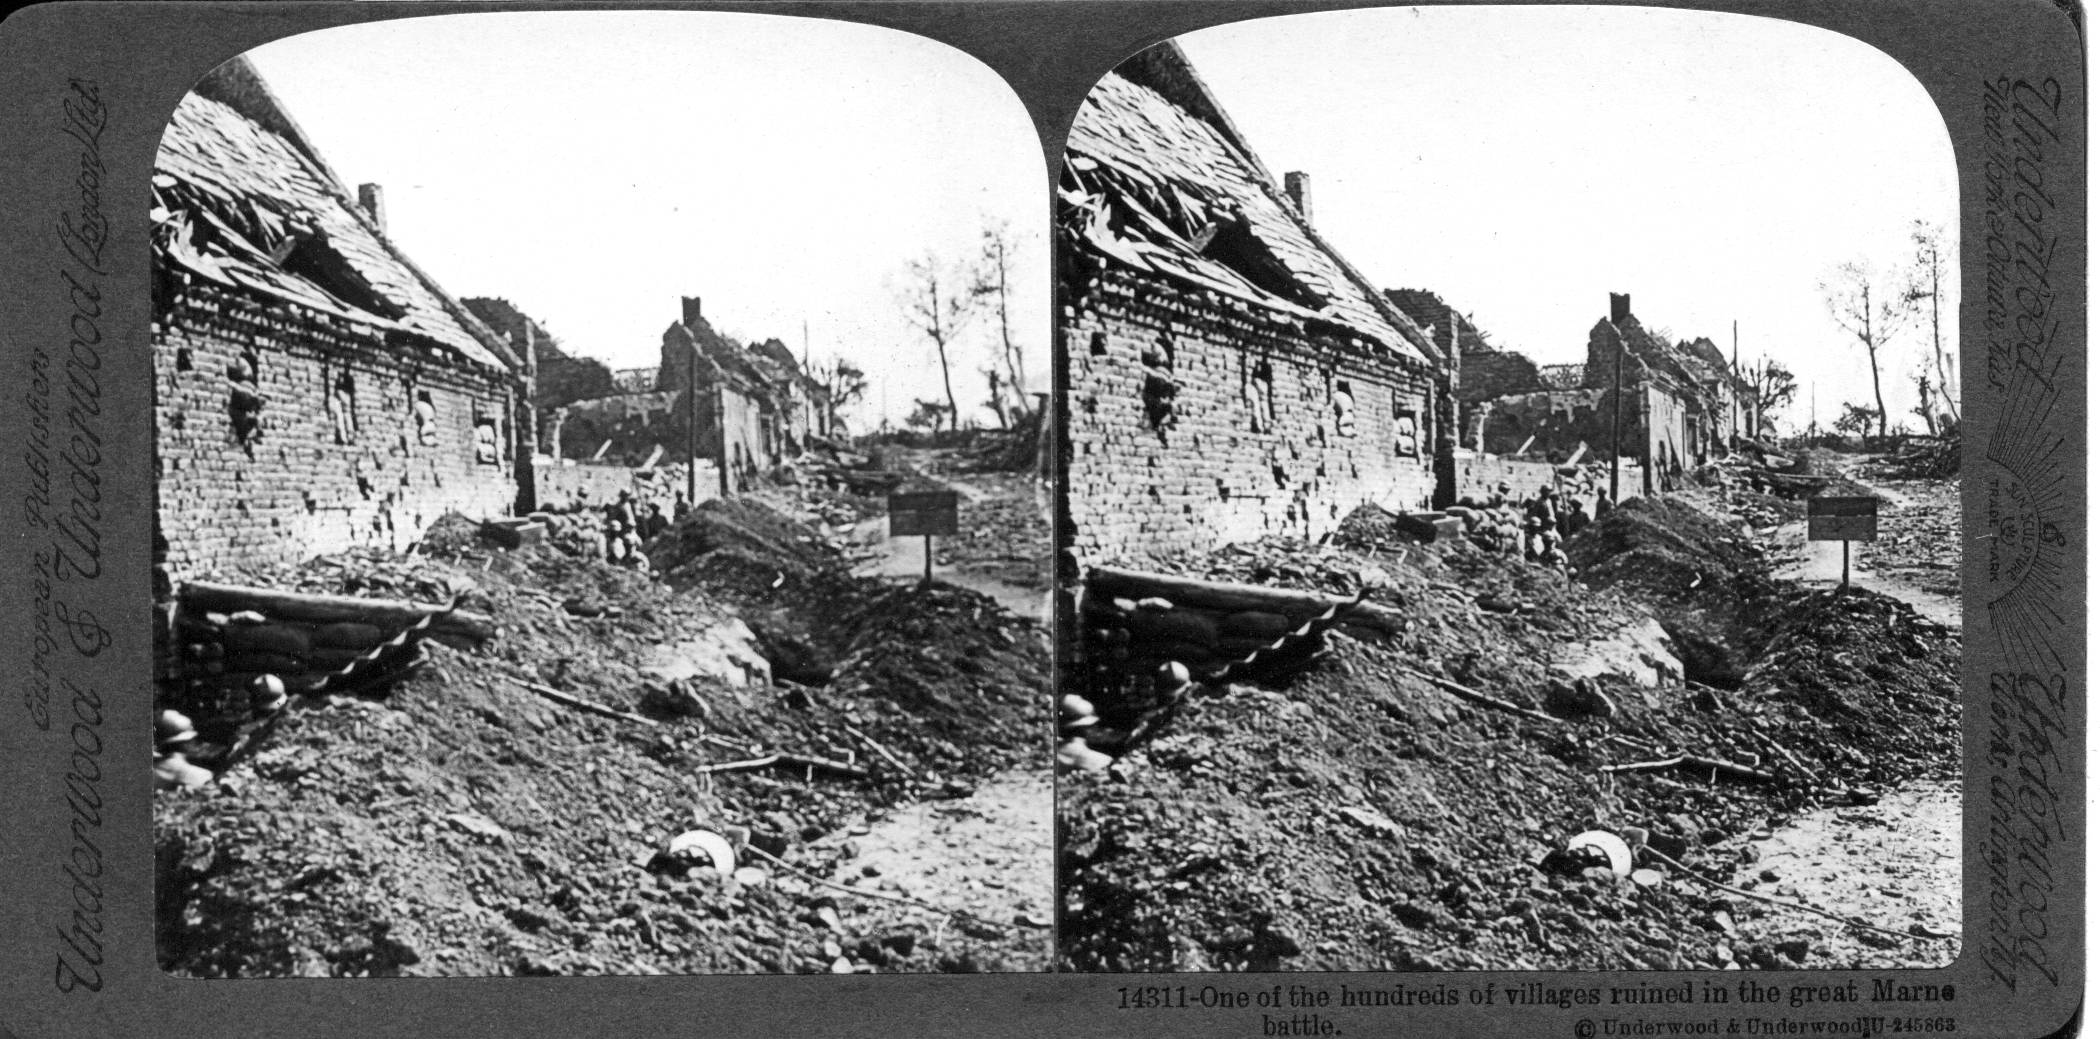 One of the hundreds of villages ruined in the great Marne battle